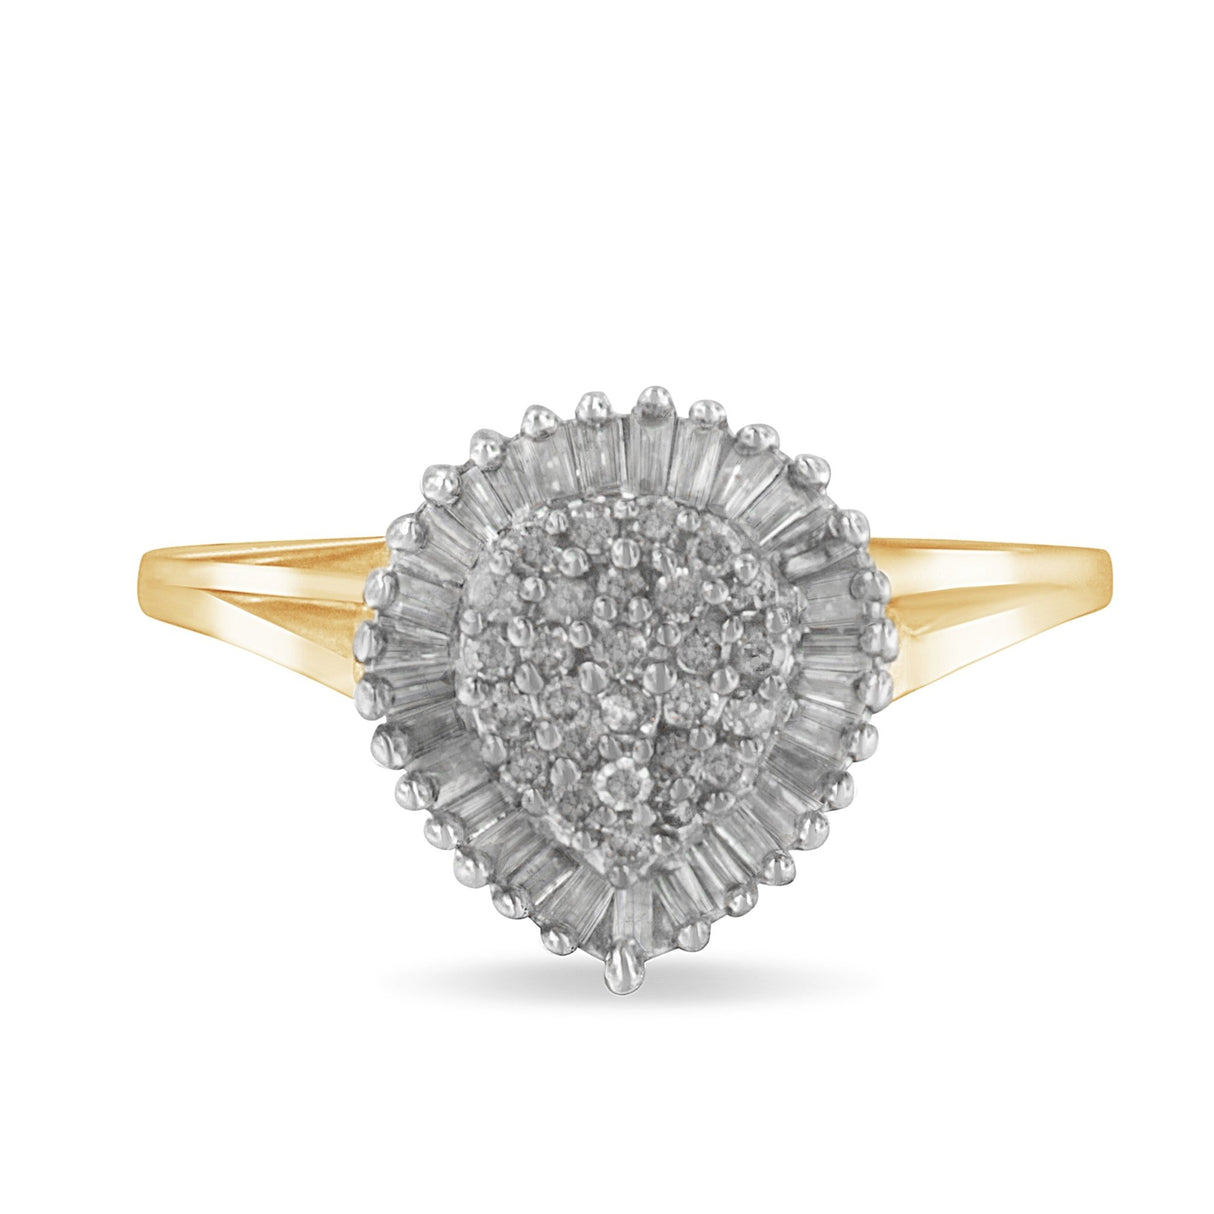 10K Yellow Gold 1/2 Cttw Round & Baguette Cut Diamond Pear Shaped Domed Pavé Cluster With Halo Cocktail Ring (J-K Color, I1-I2 Clarity) - Size 7 - Tuesday Morning-Rings